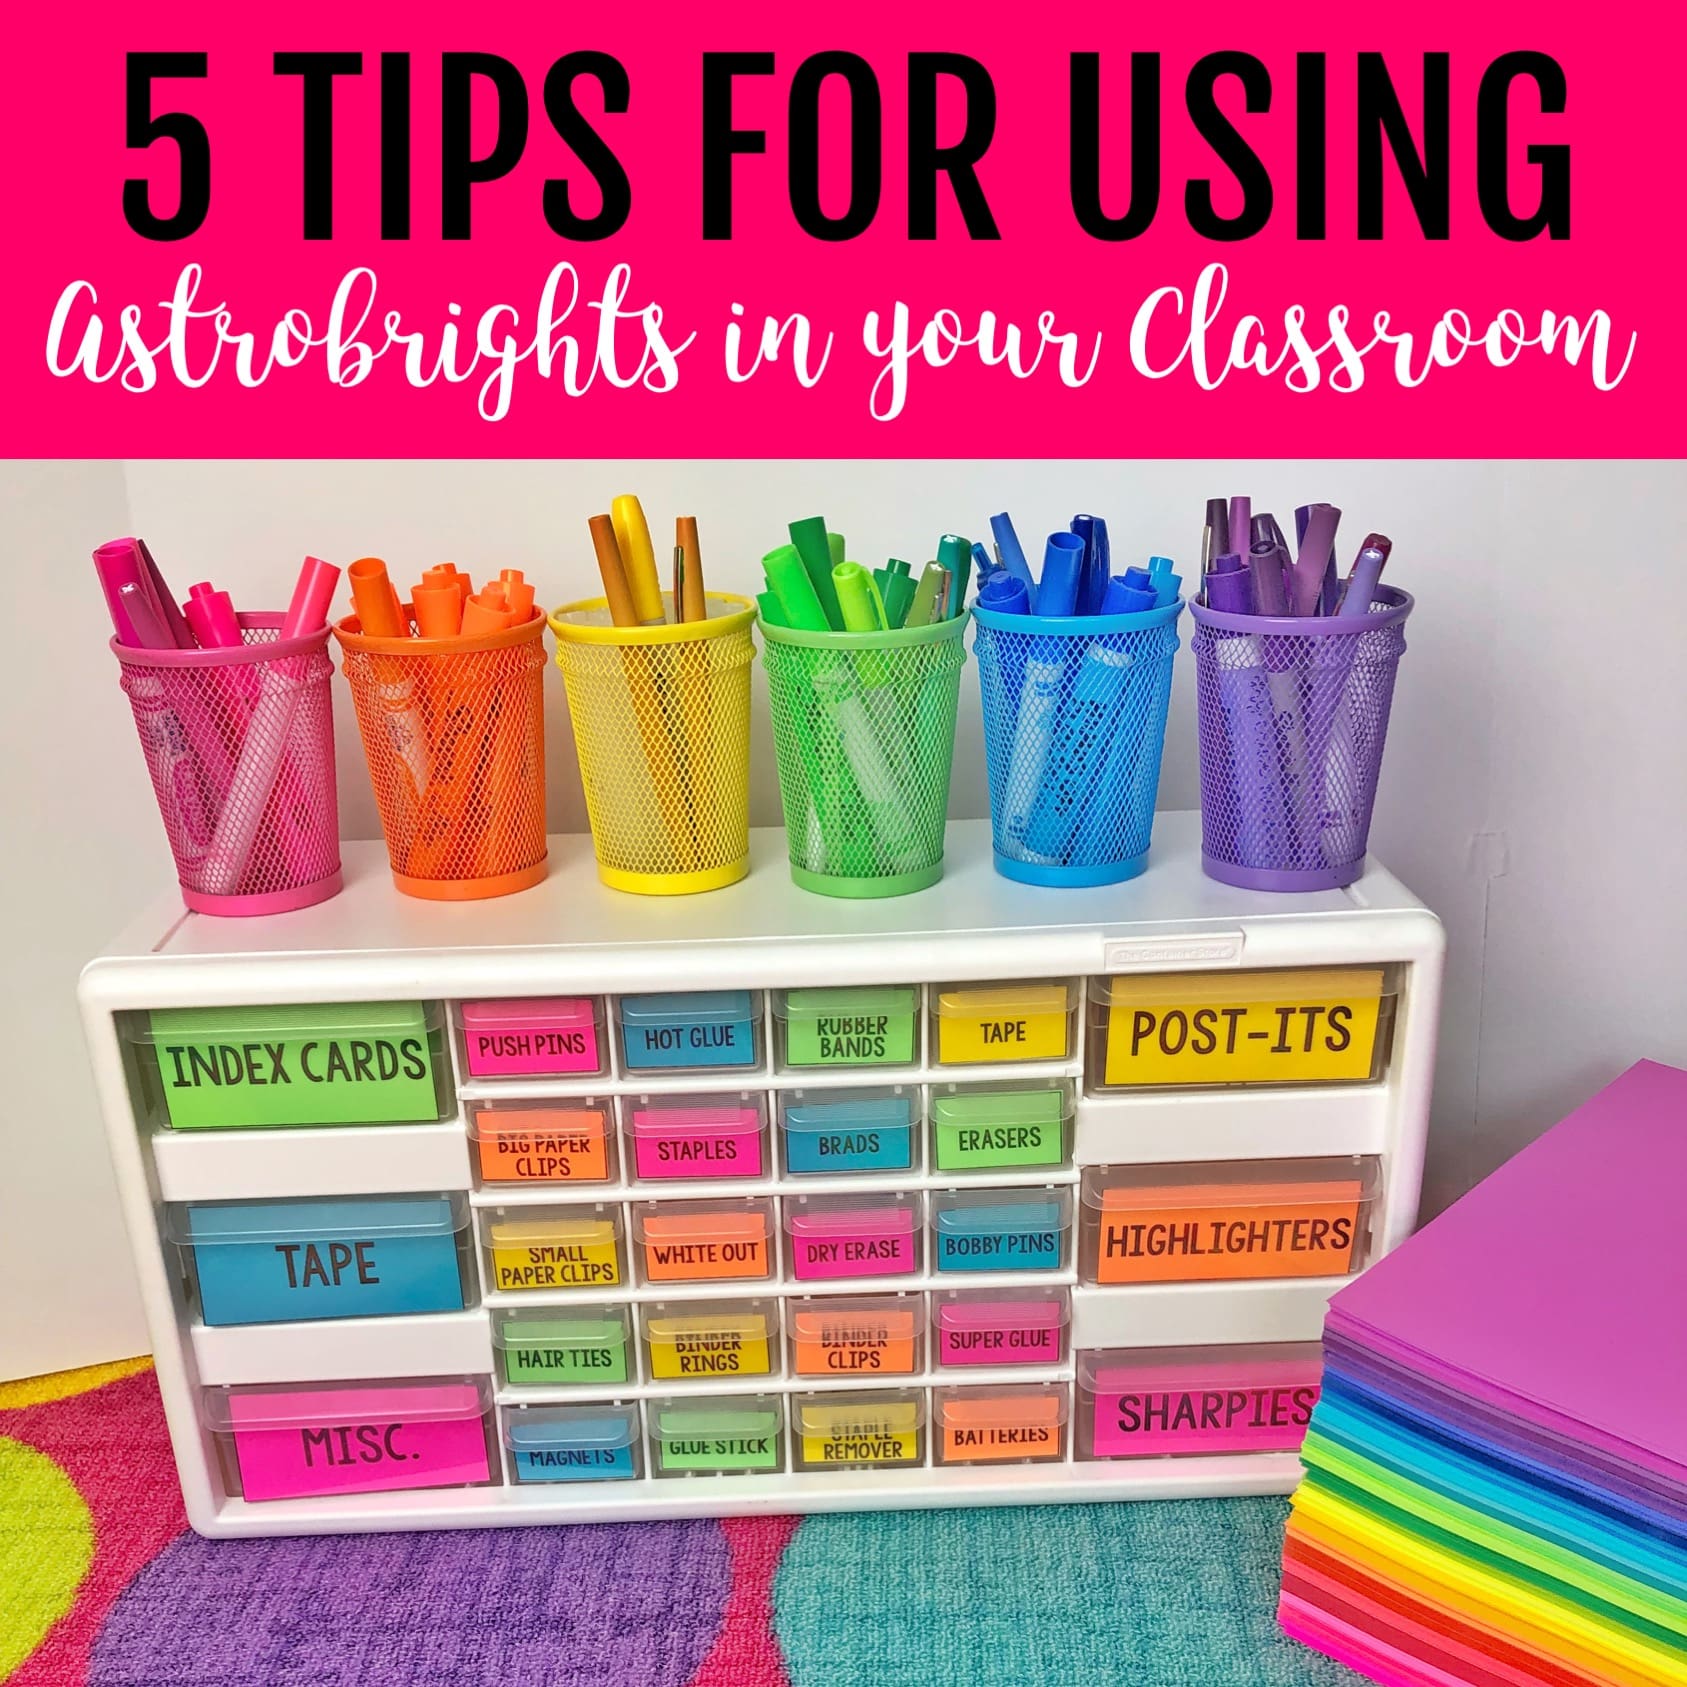 5 Tips for Using Astrobrights in Your Classroom | Especially Education